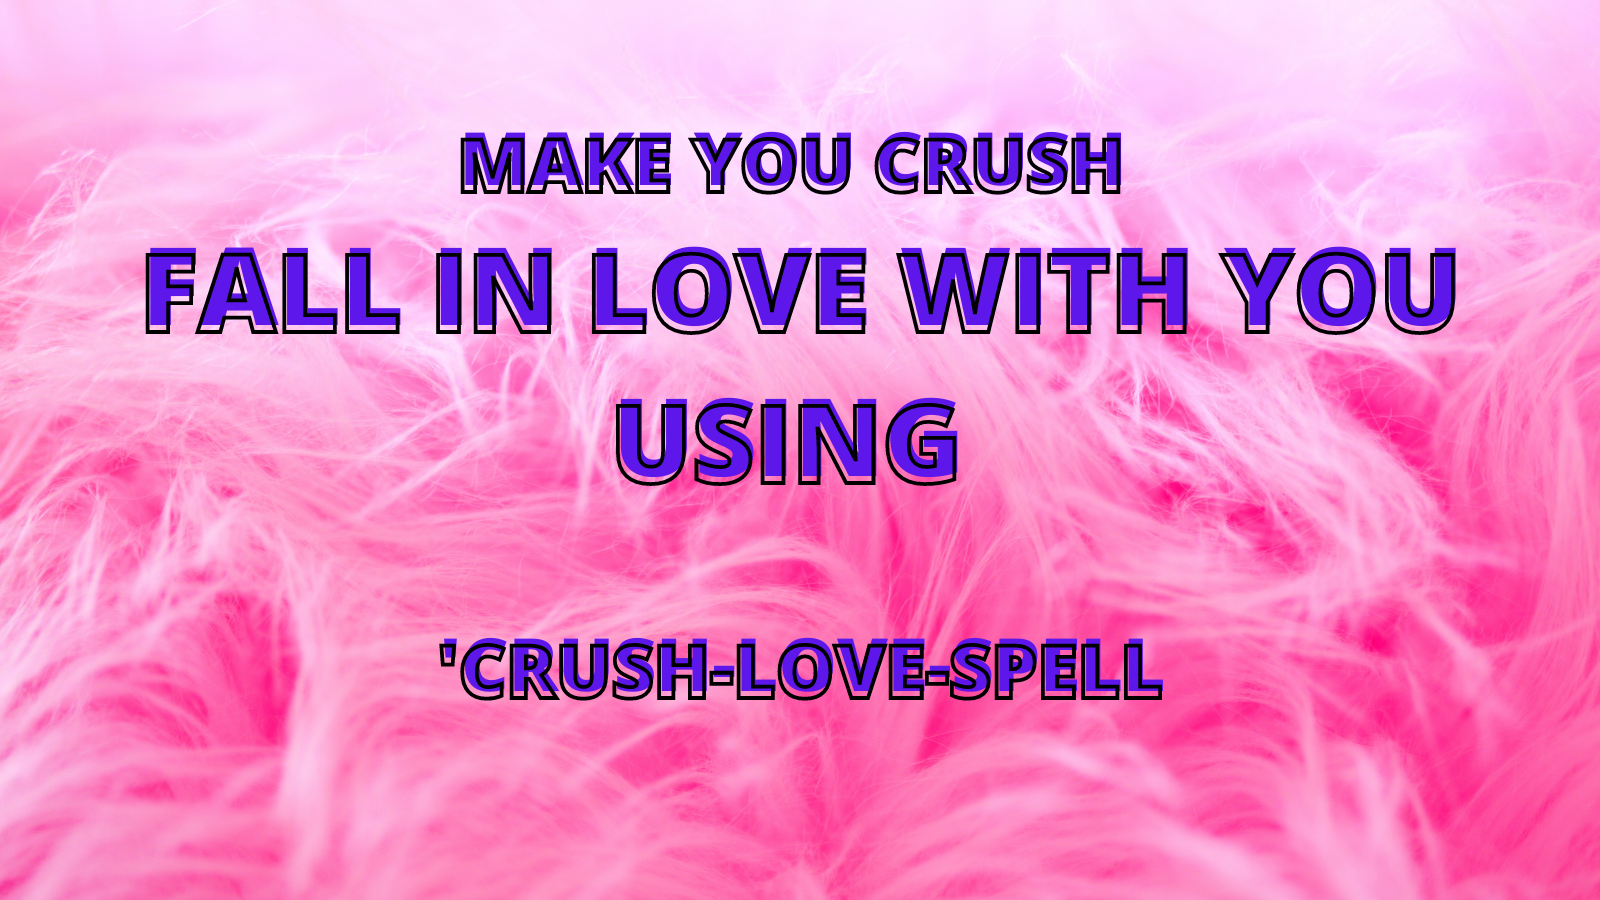 MAKE YOU CRUSH FALL IN LOVE WITH YOU USING CRUSH LOVE SPELL